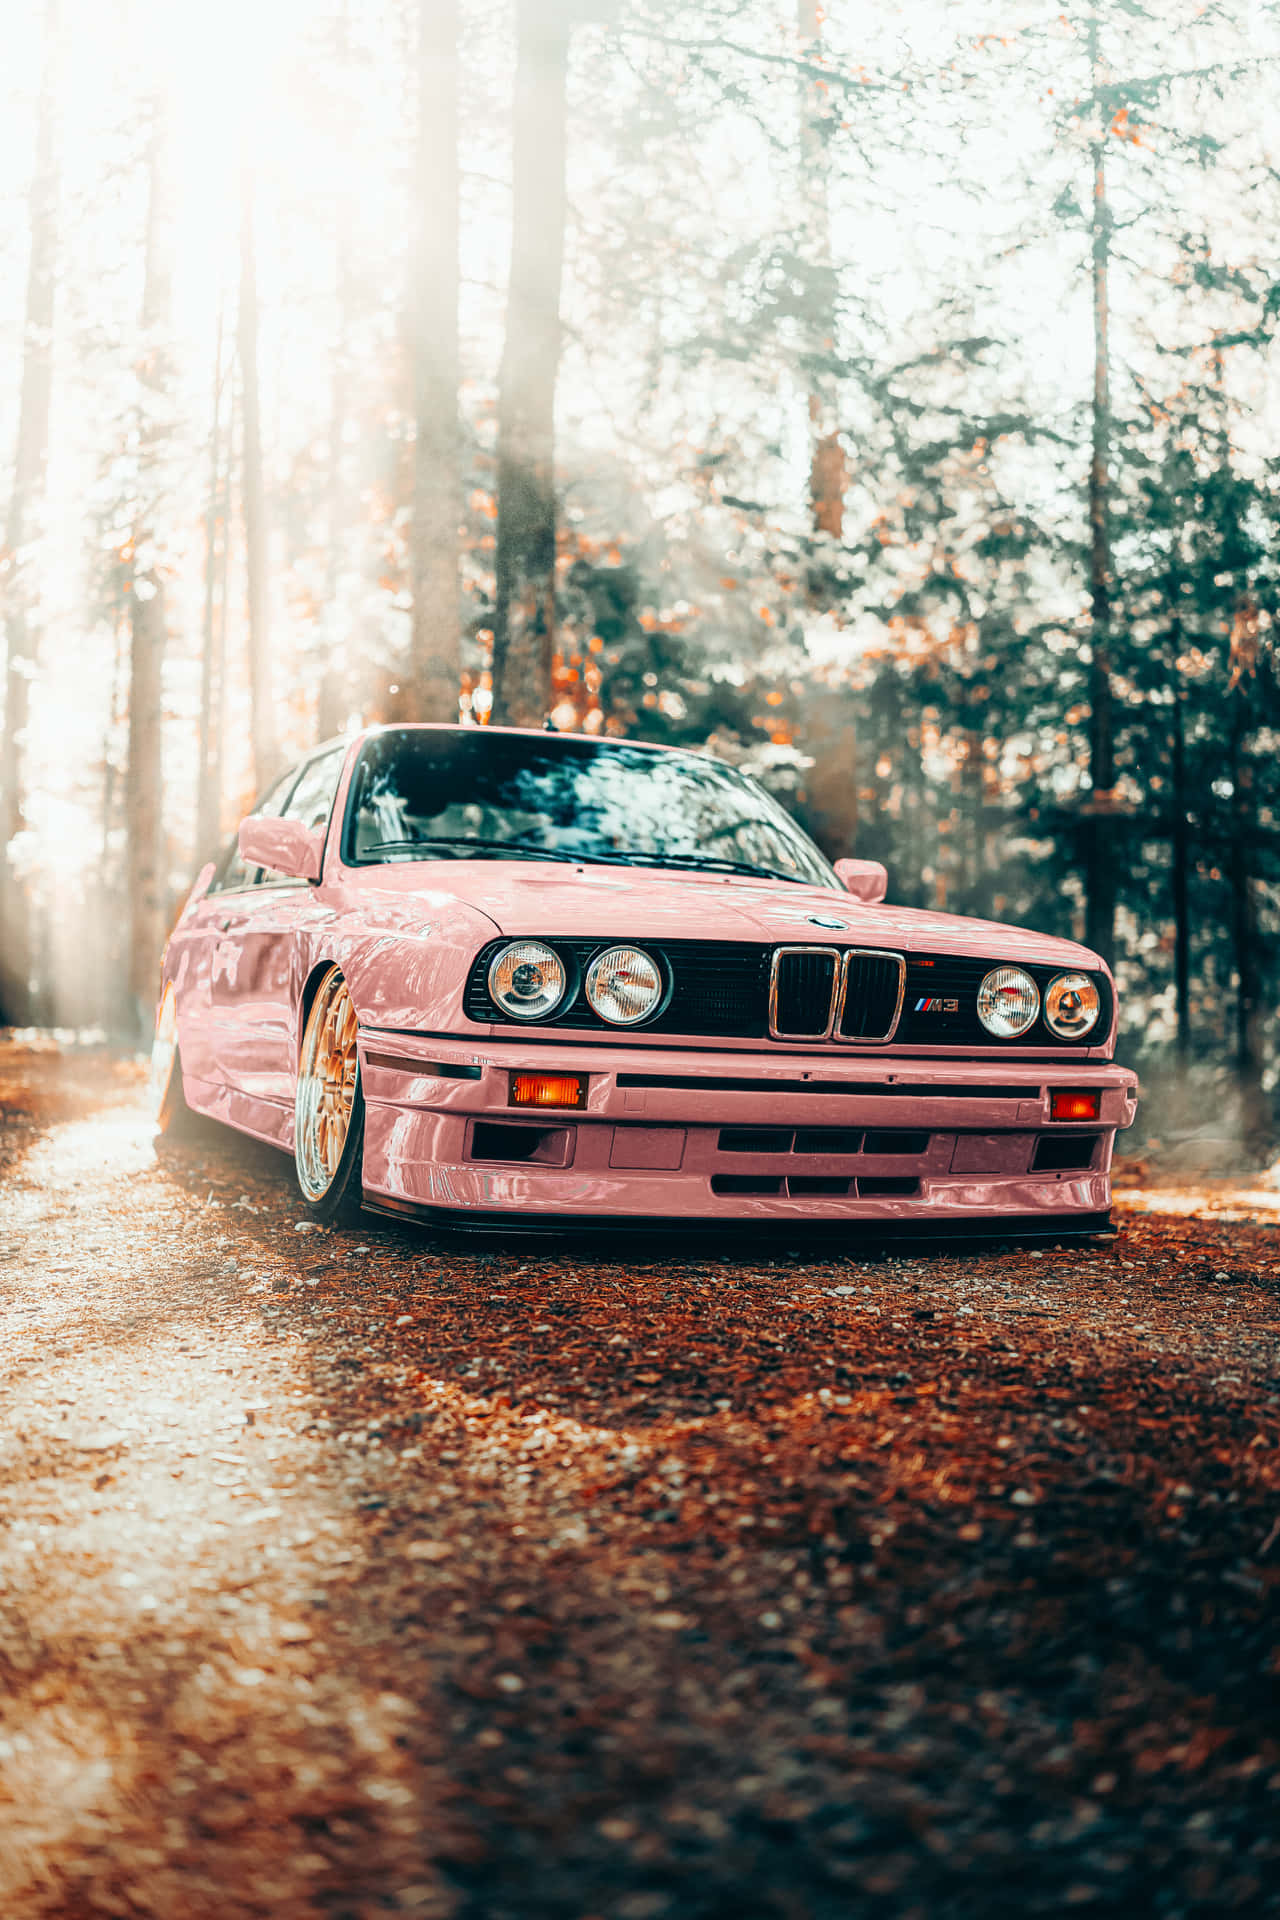 A Pink Bmw E30 Parked In The Woods Wallpaper